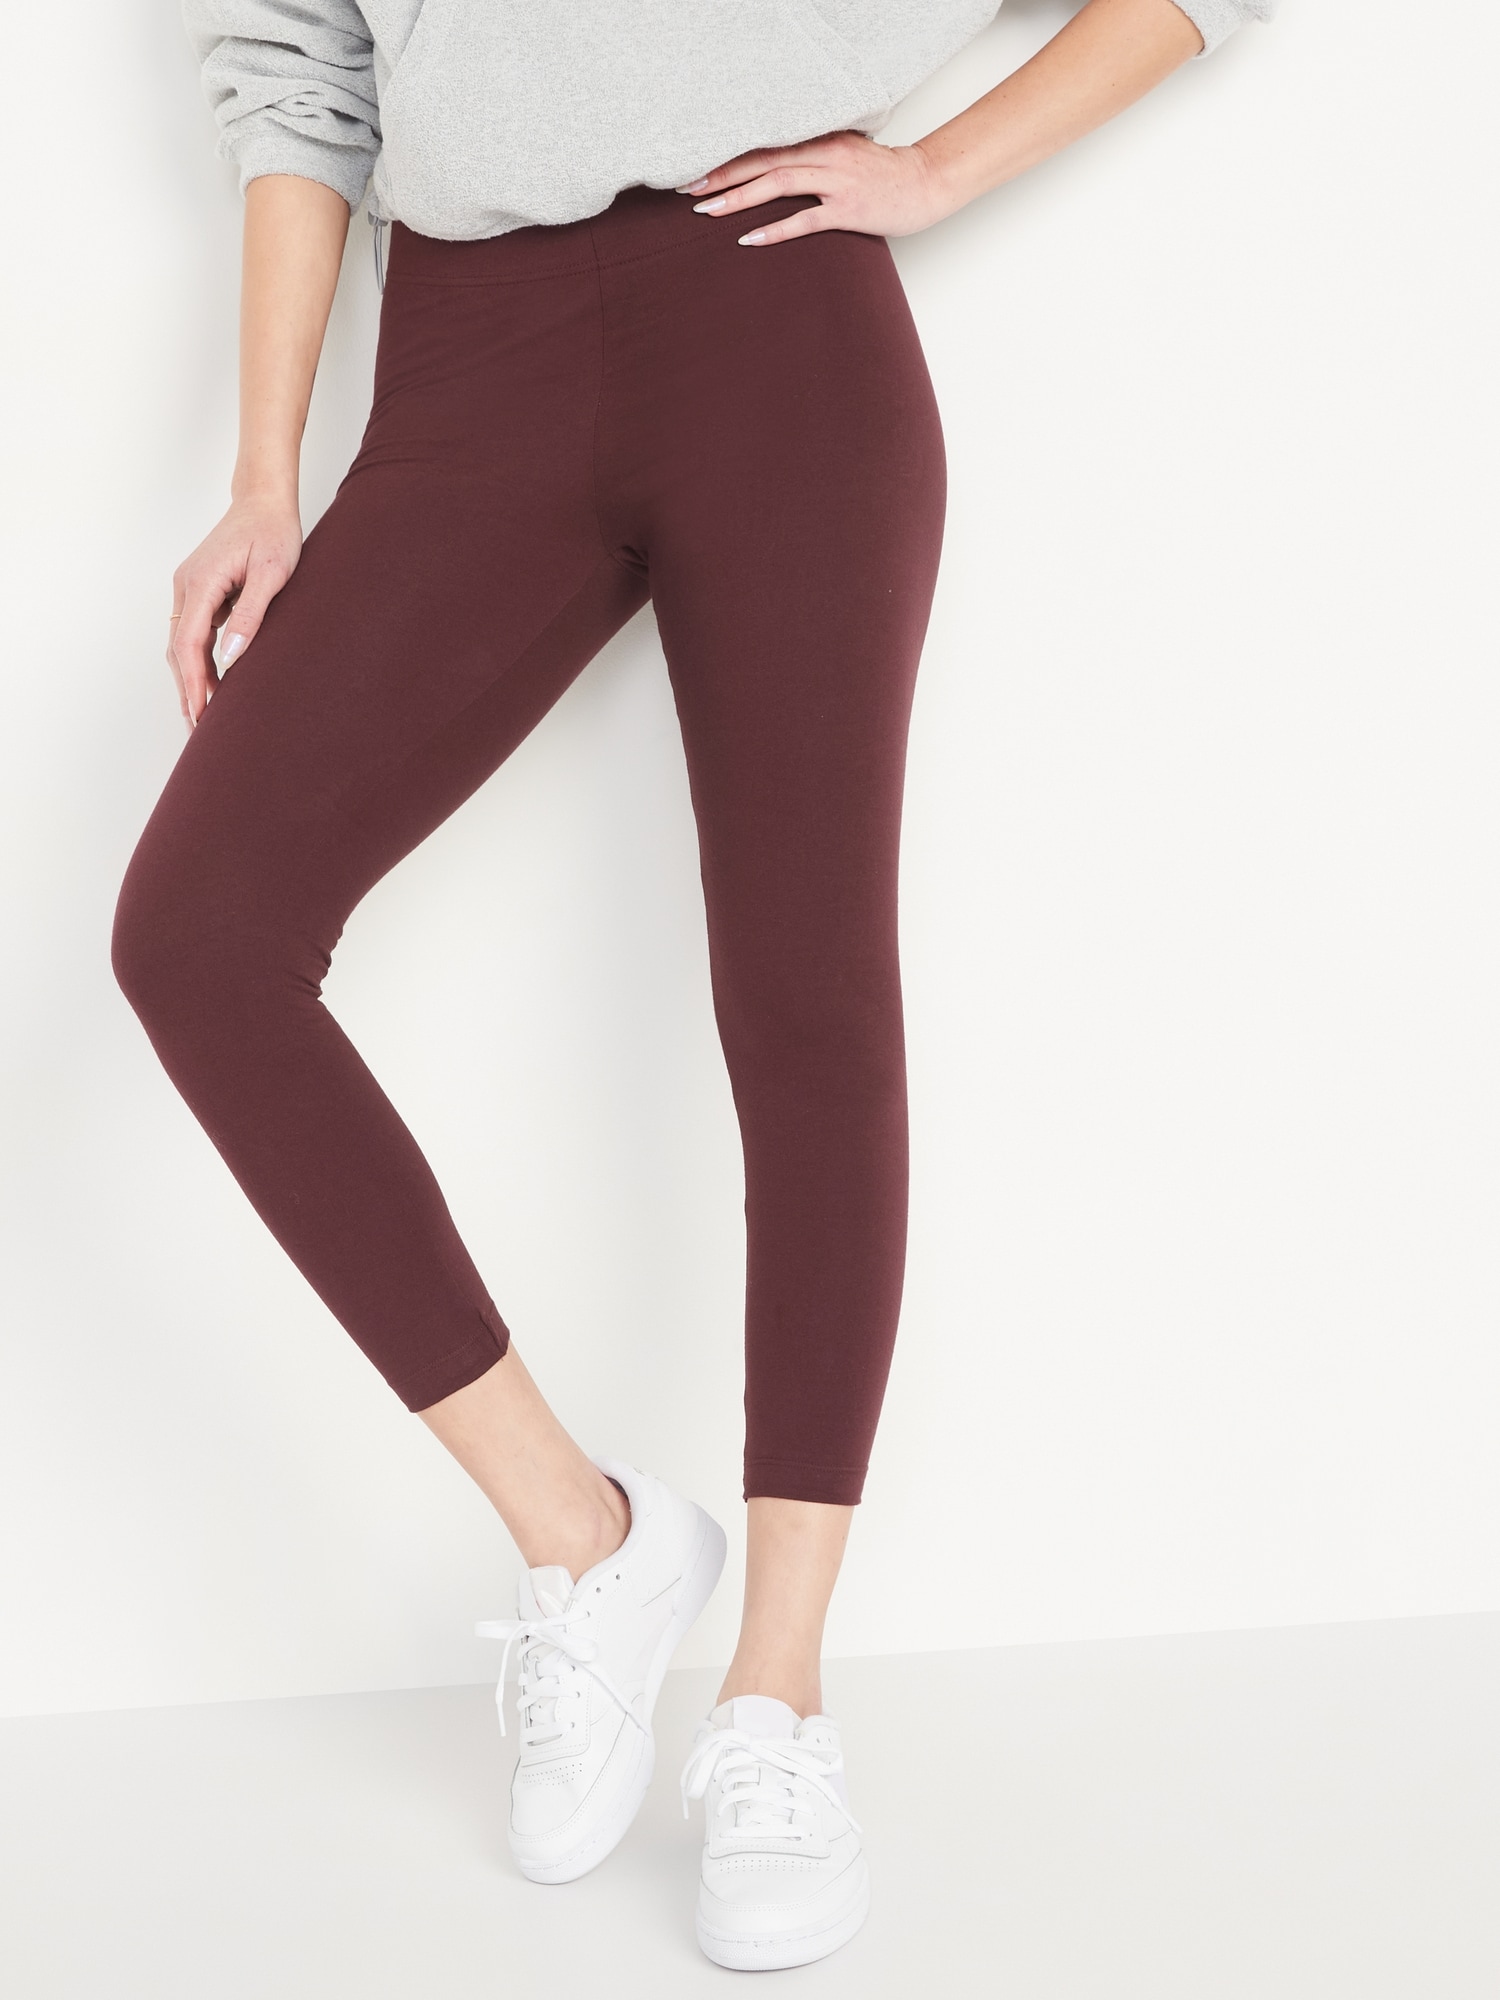 Old Navy Solid Brown Leggings Size M (Petite) - 46% off